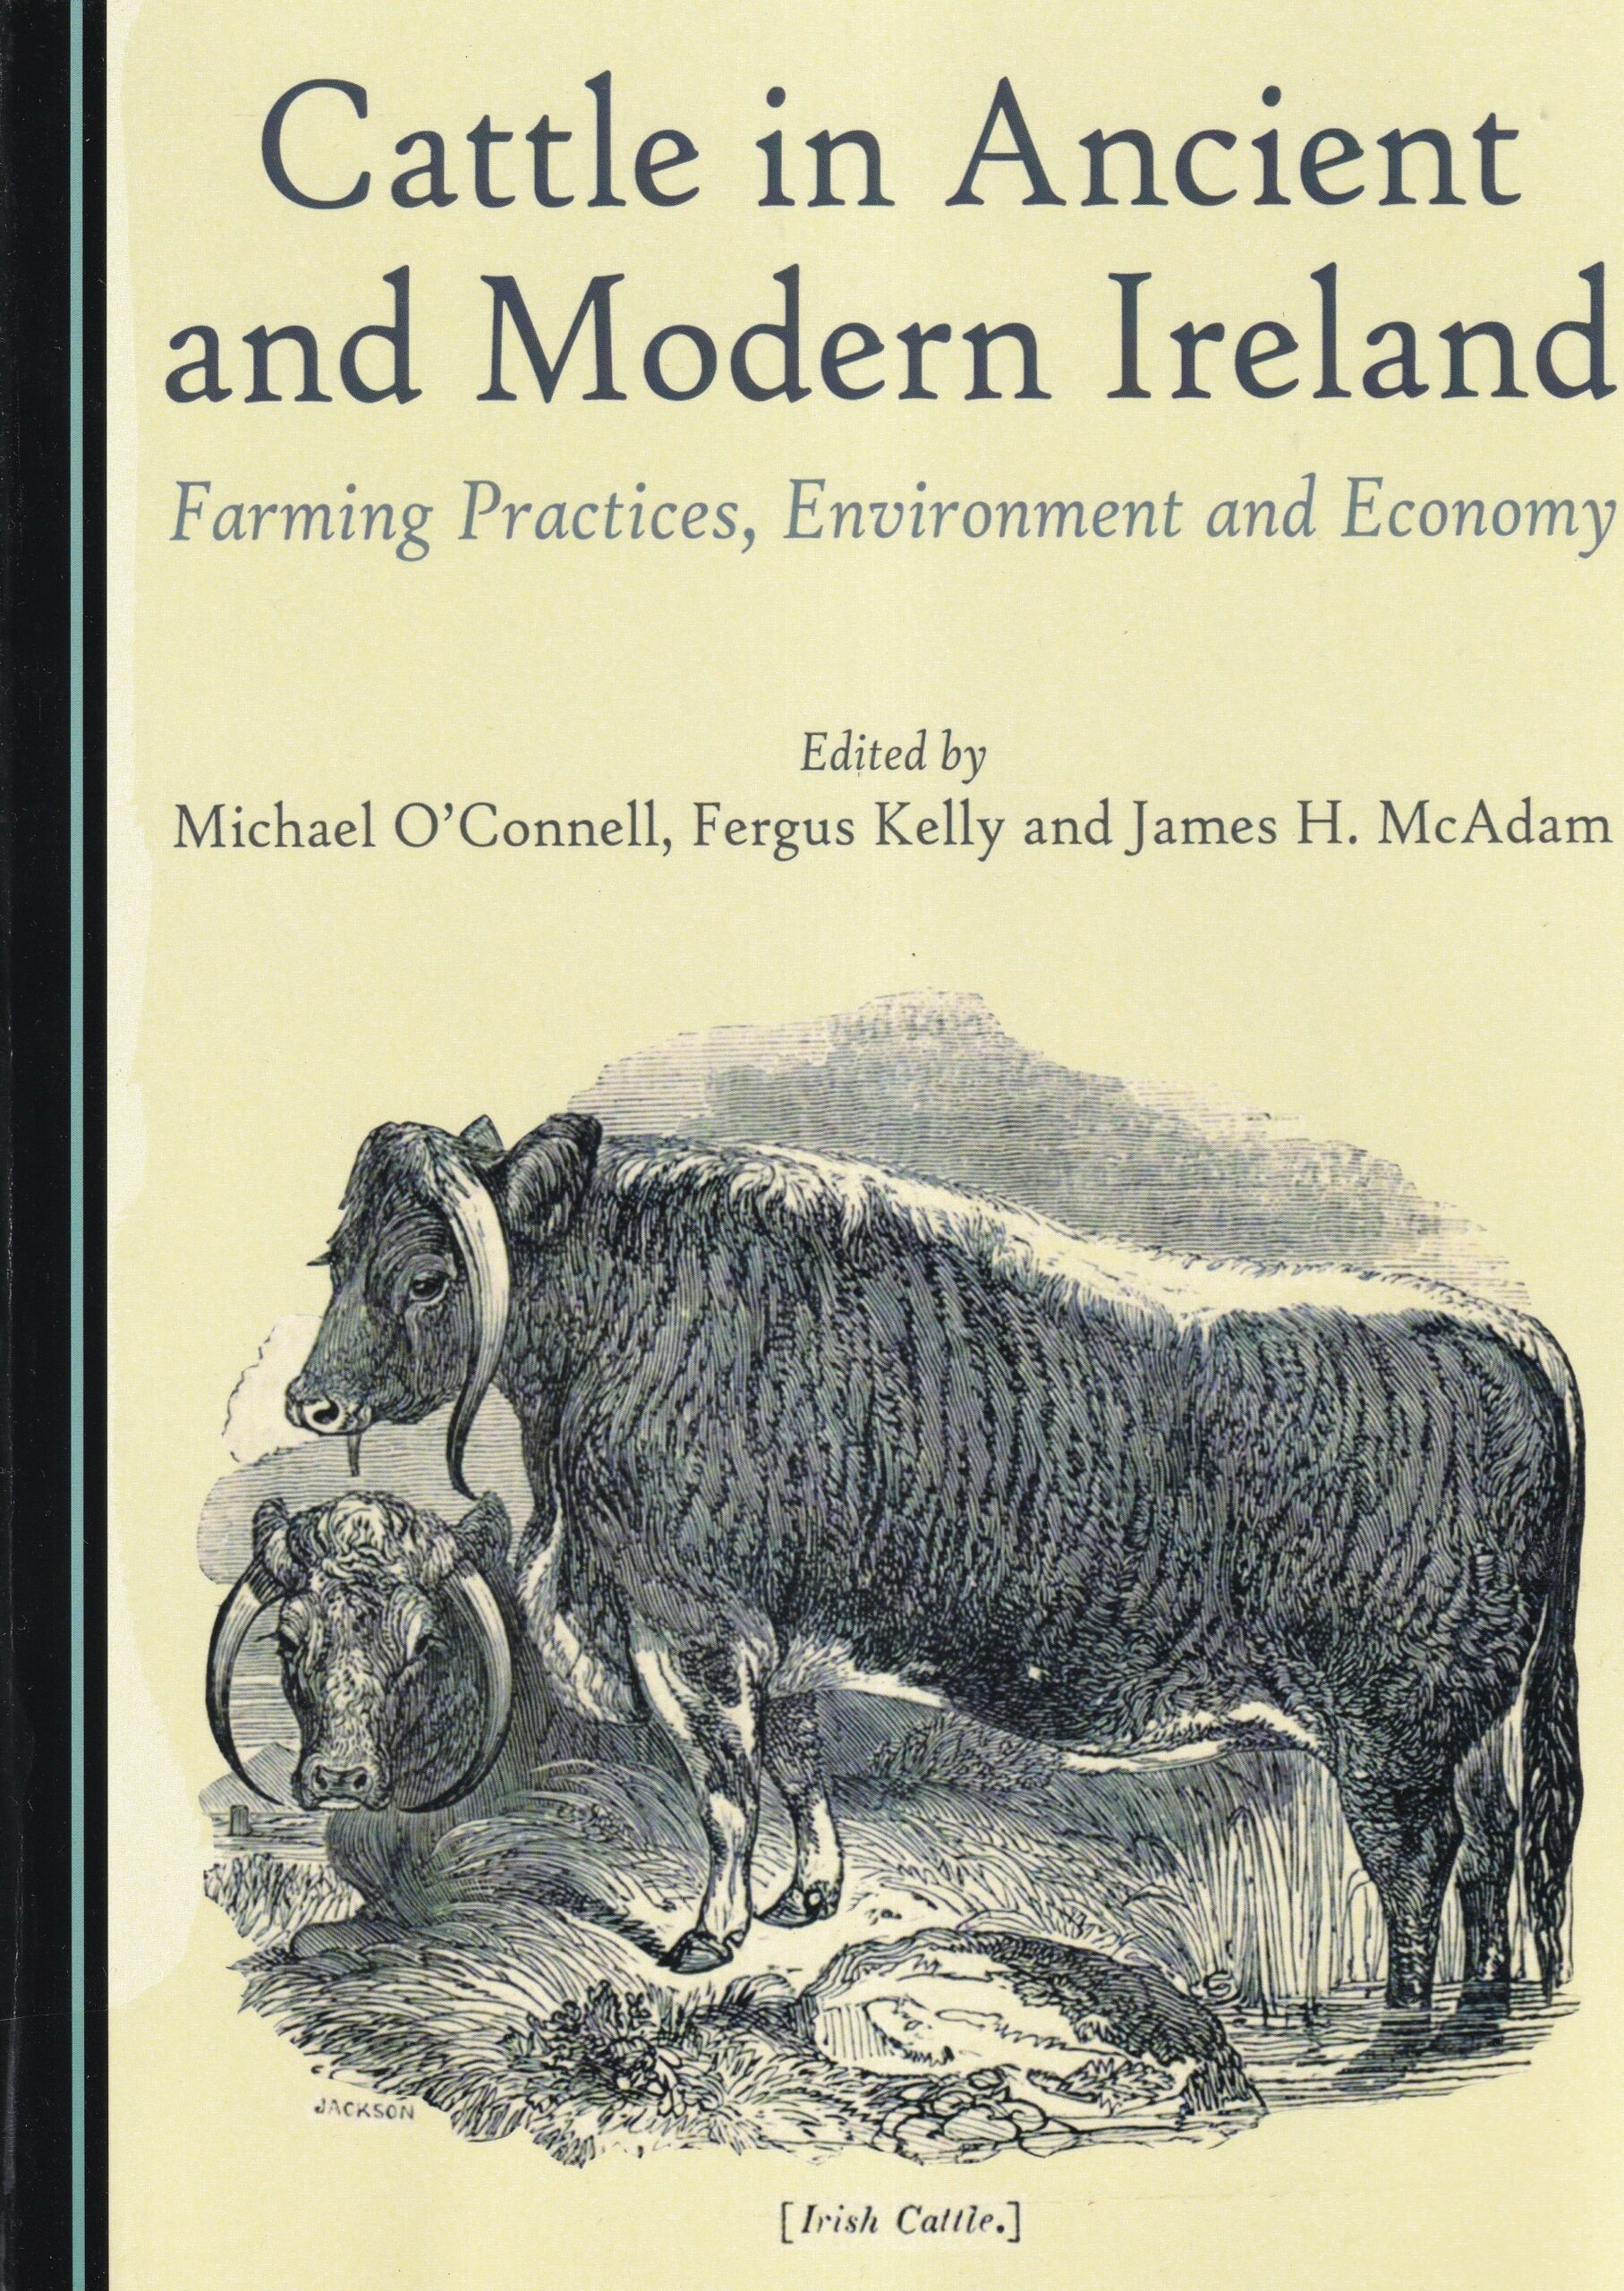 Cattle in Ancient and Modern Ireland: Farming Practices, Environment and Economy by Michael O'Connell, Fergus Kelly and James H. McAdam (eds.)